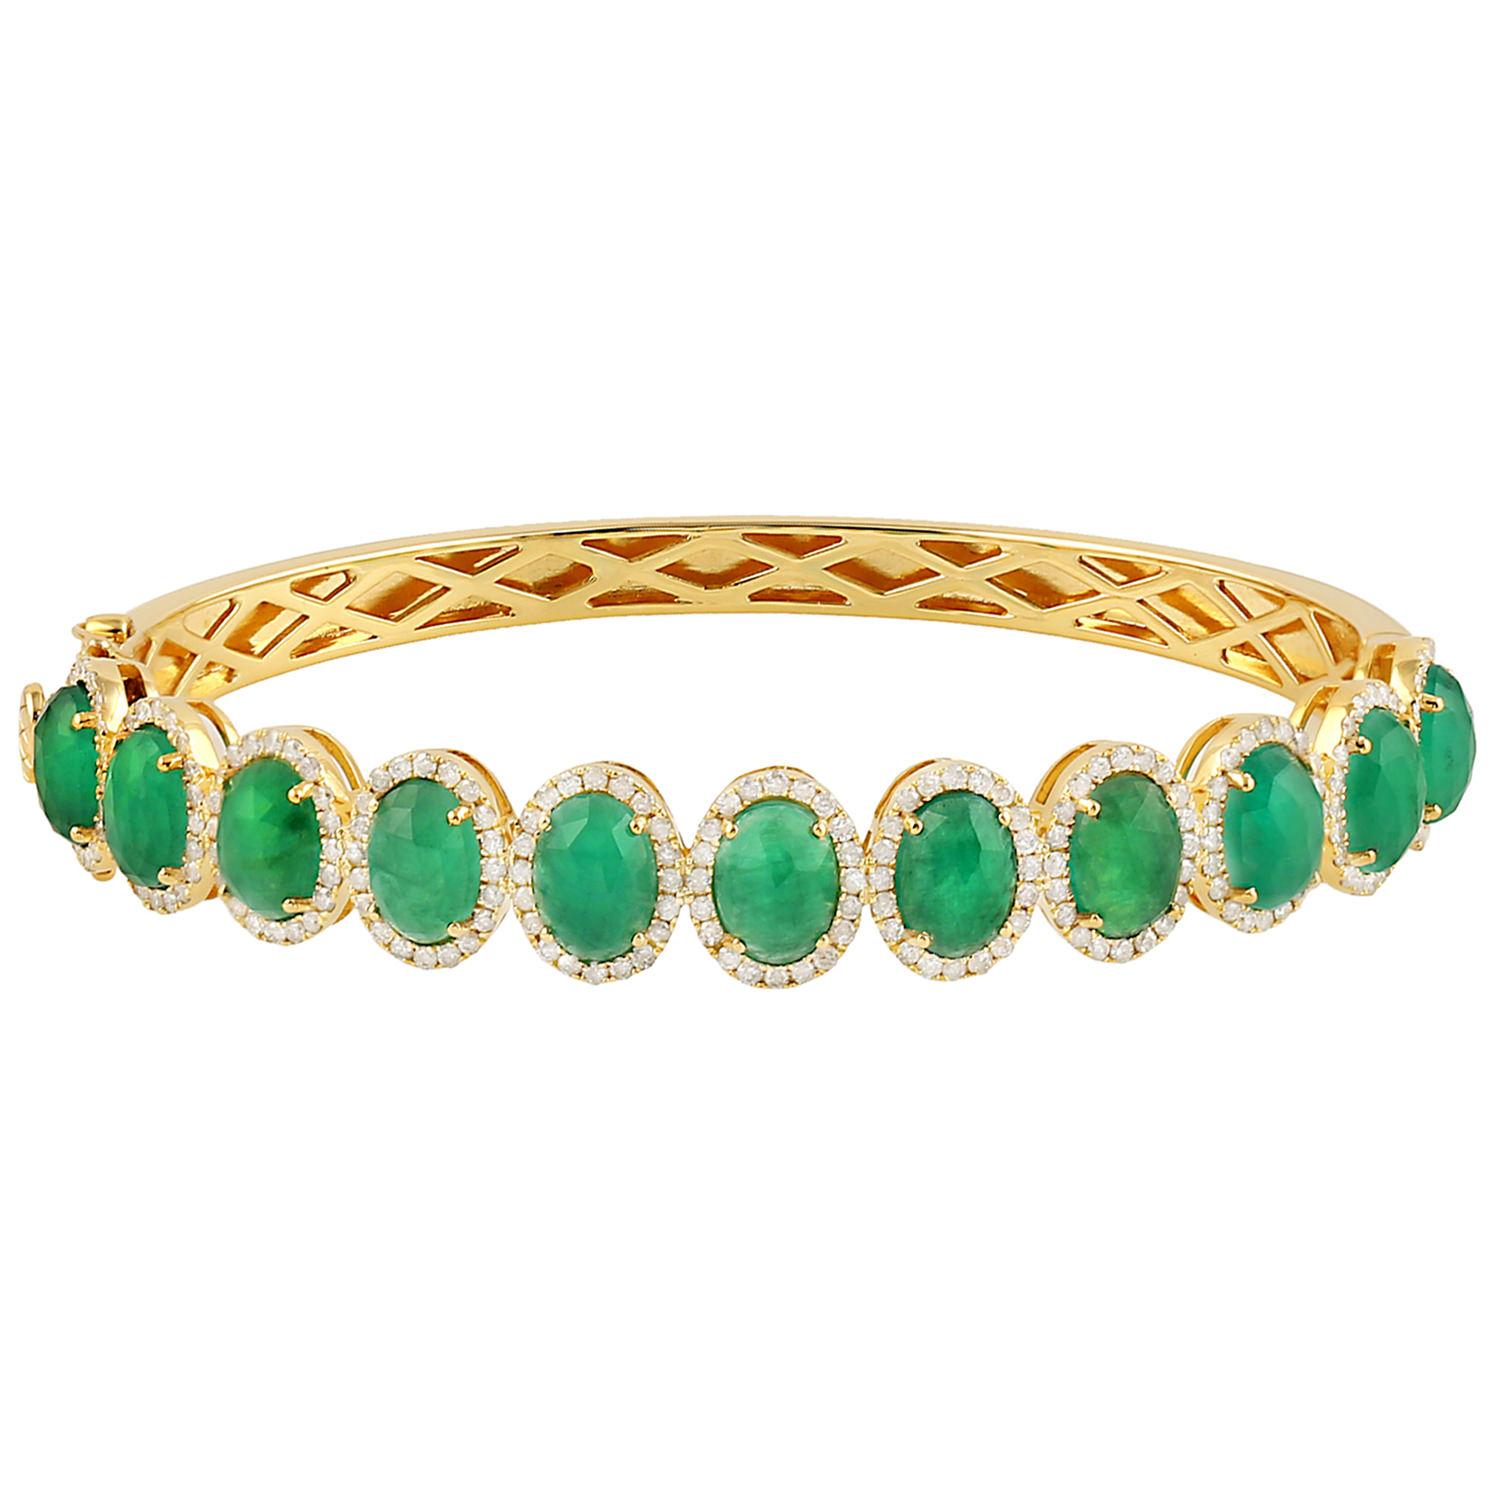 Emerald Bangle Bracelet Diamond Halo 7.85 Carats 18K Yellow Gold In Excellent Condition For Sale In Laguna Niguel, CA